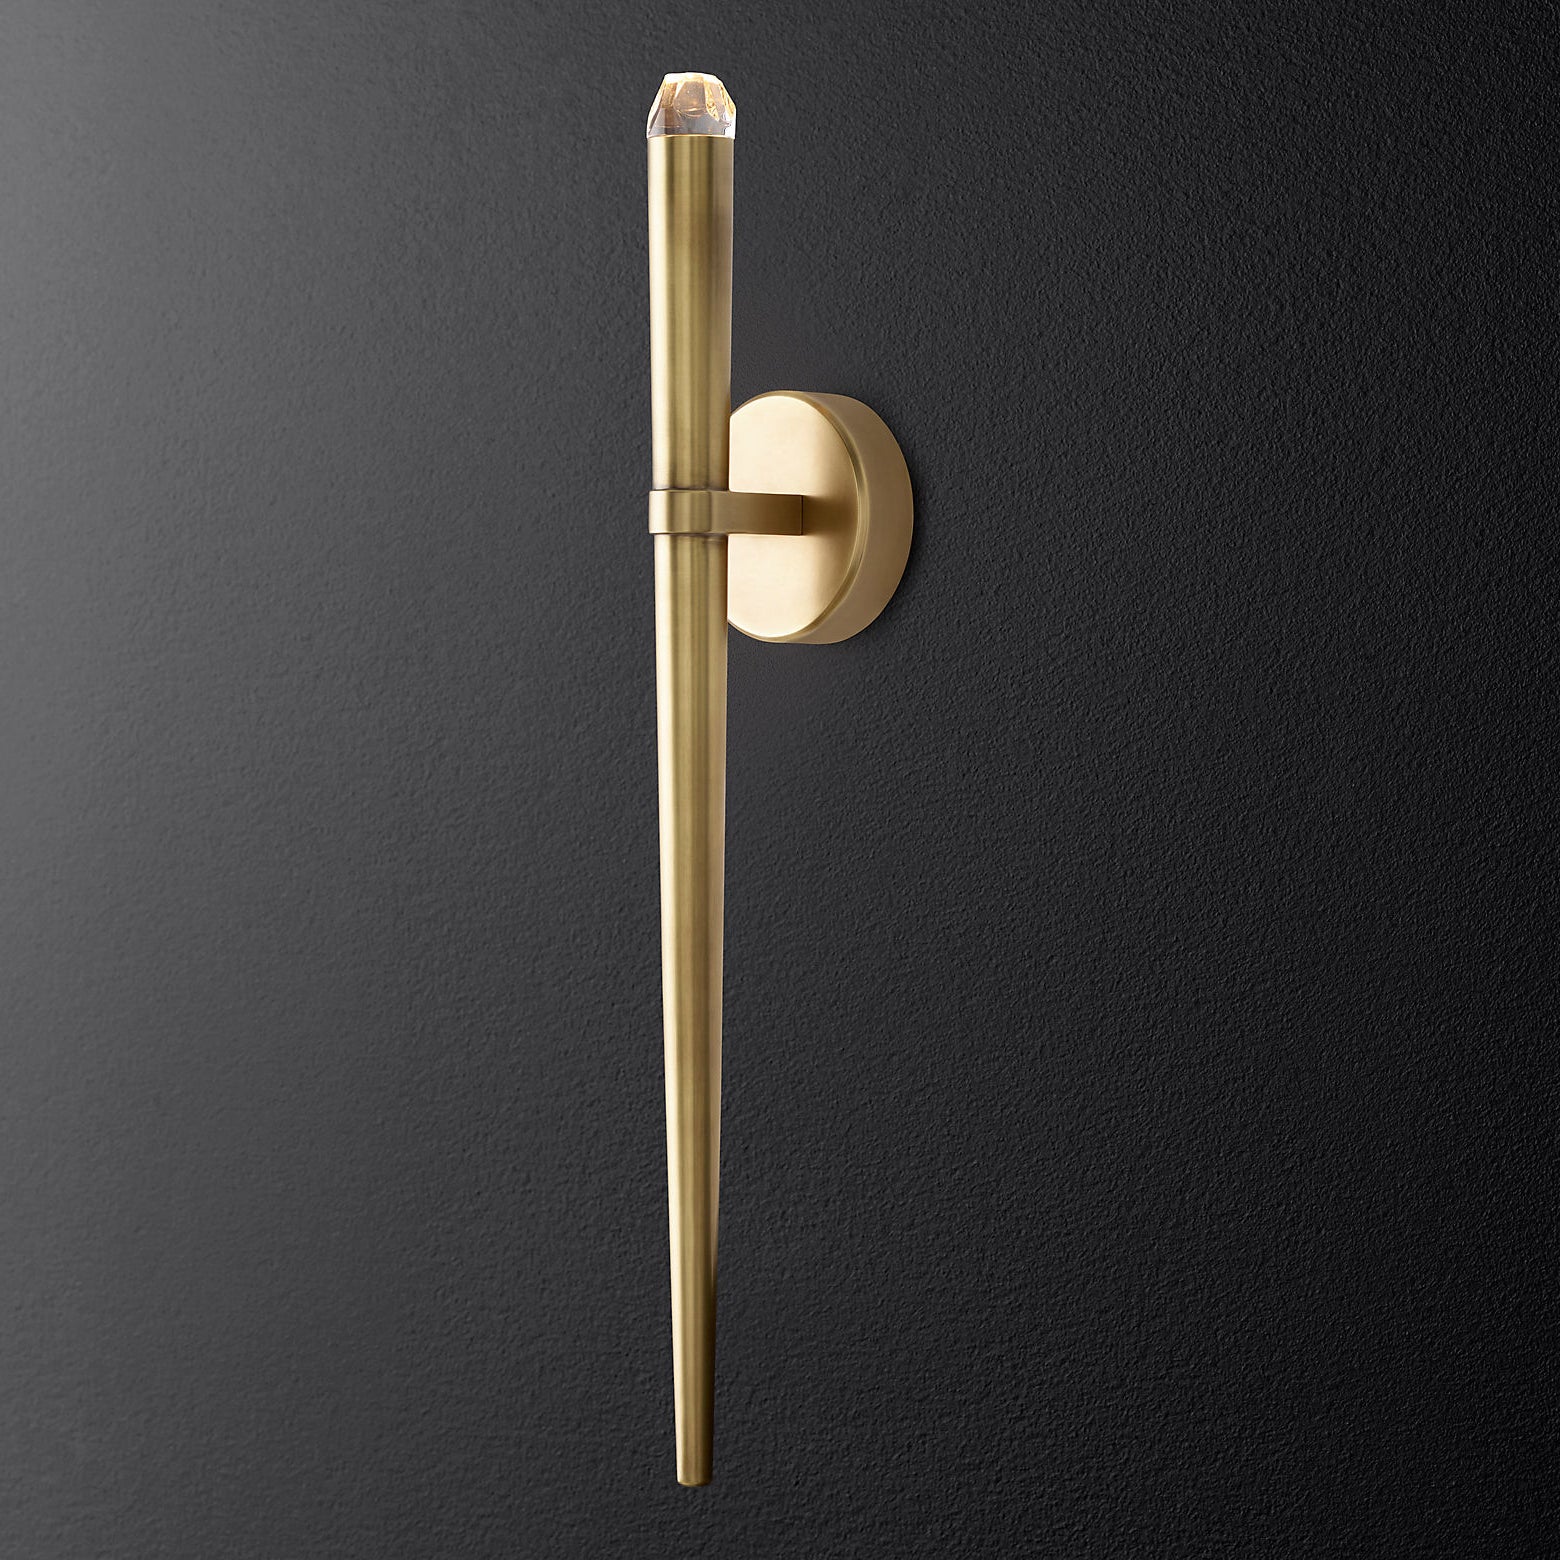 Slender Torch Wall Sconce